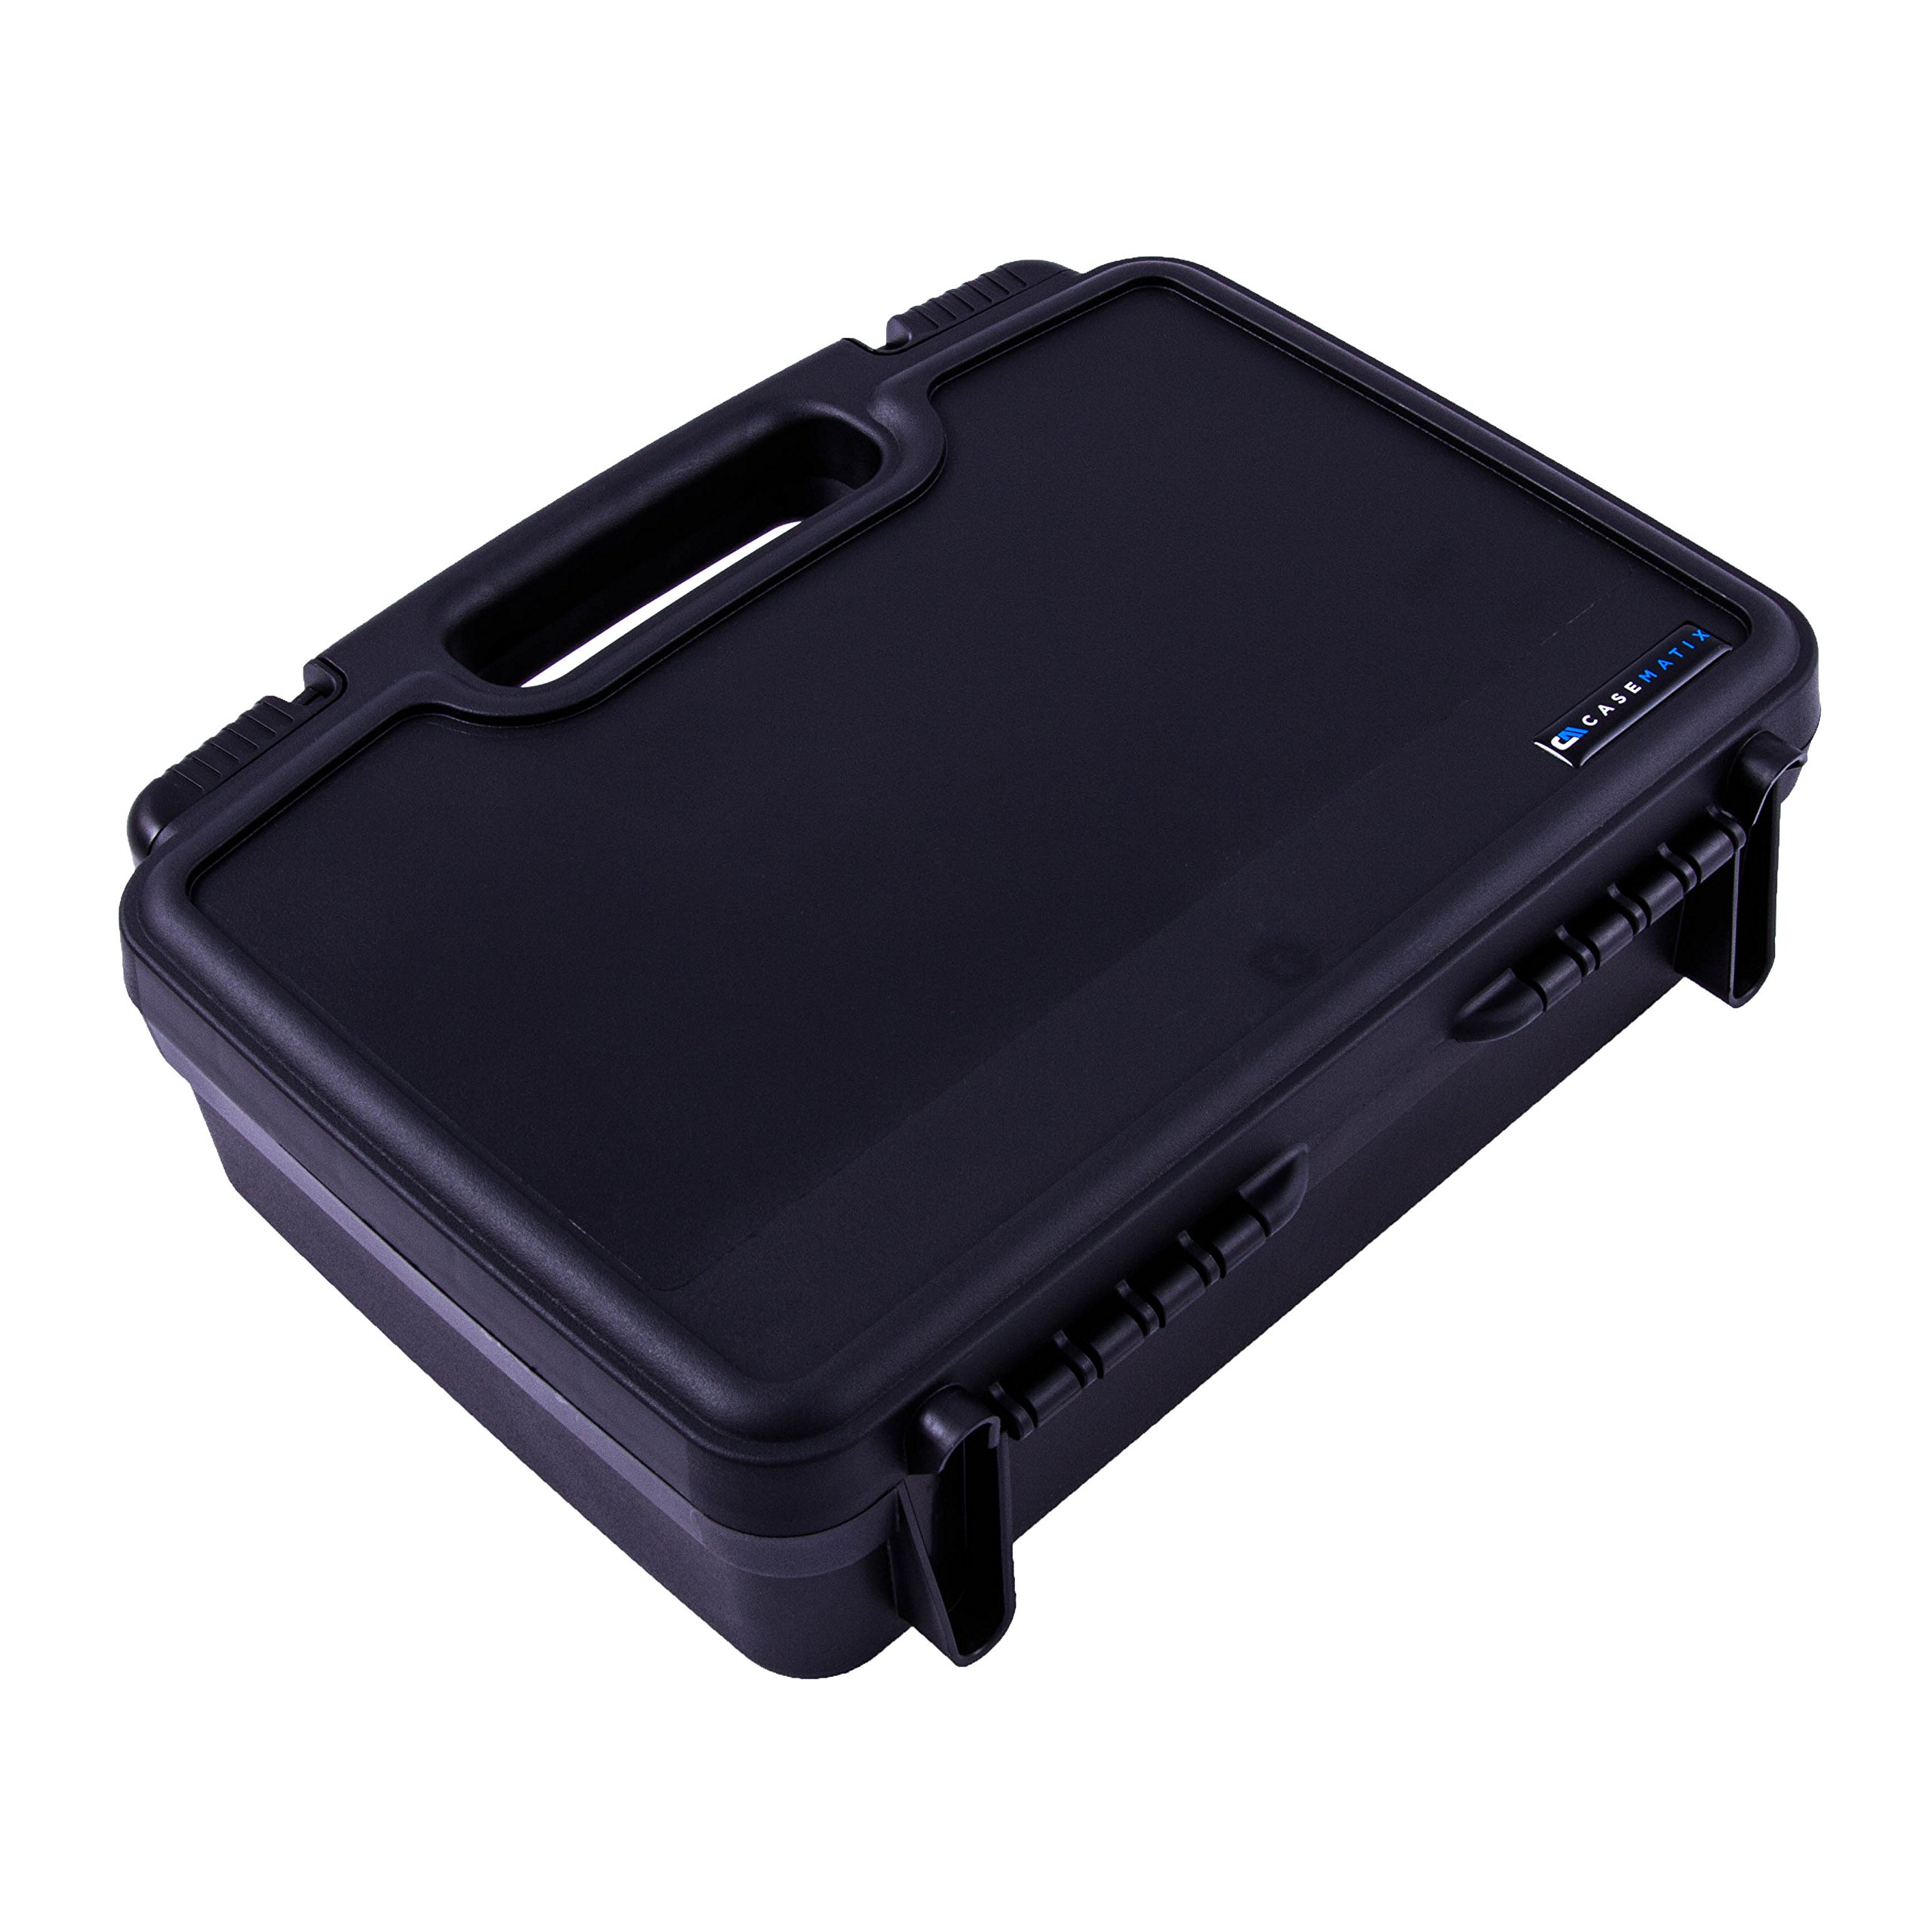 CASEMATIX Portable Hard Travel Case with Diced Foam Compatible with AAXA P7 Pico Projector, Ivation, Brookstone Projectors and Others with Mini Tripod, Charger, and Small Accessories - Case Only